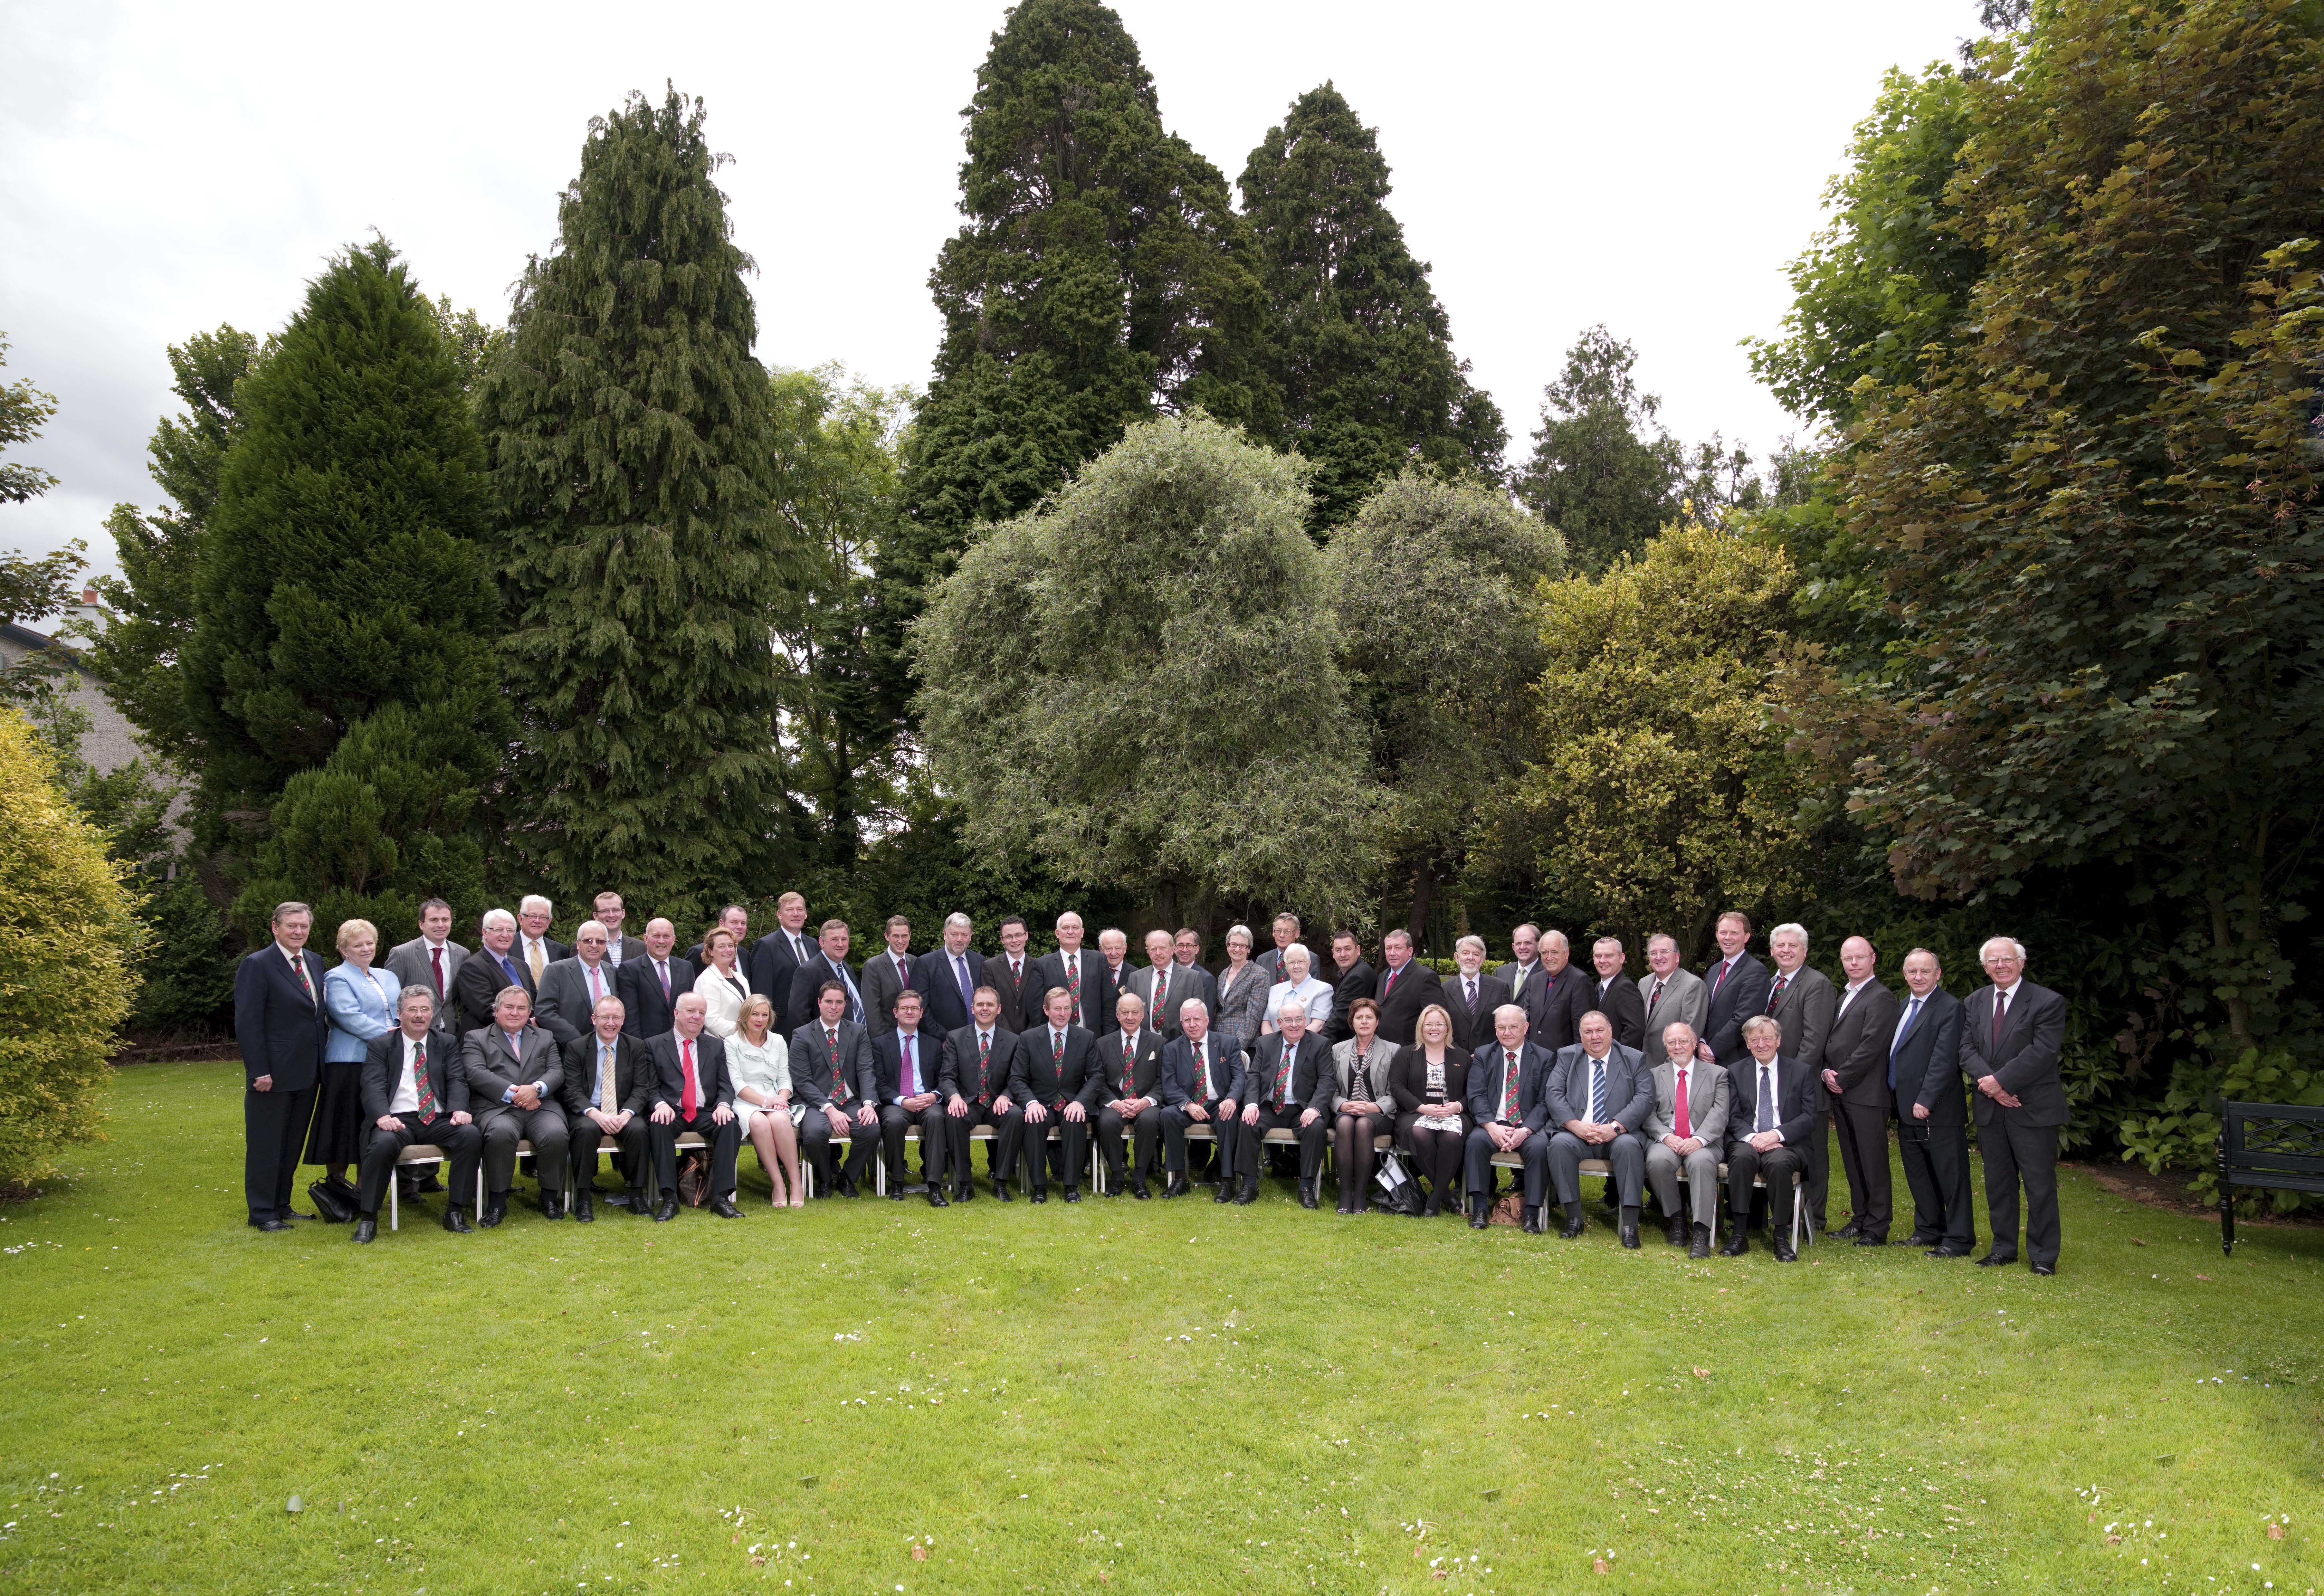 Delegates to the 42nd plenary of the British Irish Parliamentary Assembly at the Rochestown Park Hotel, Cork, 13-14 June 2011